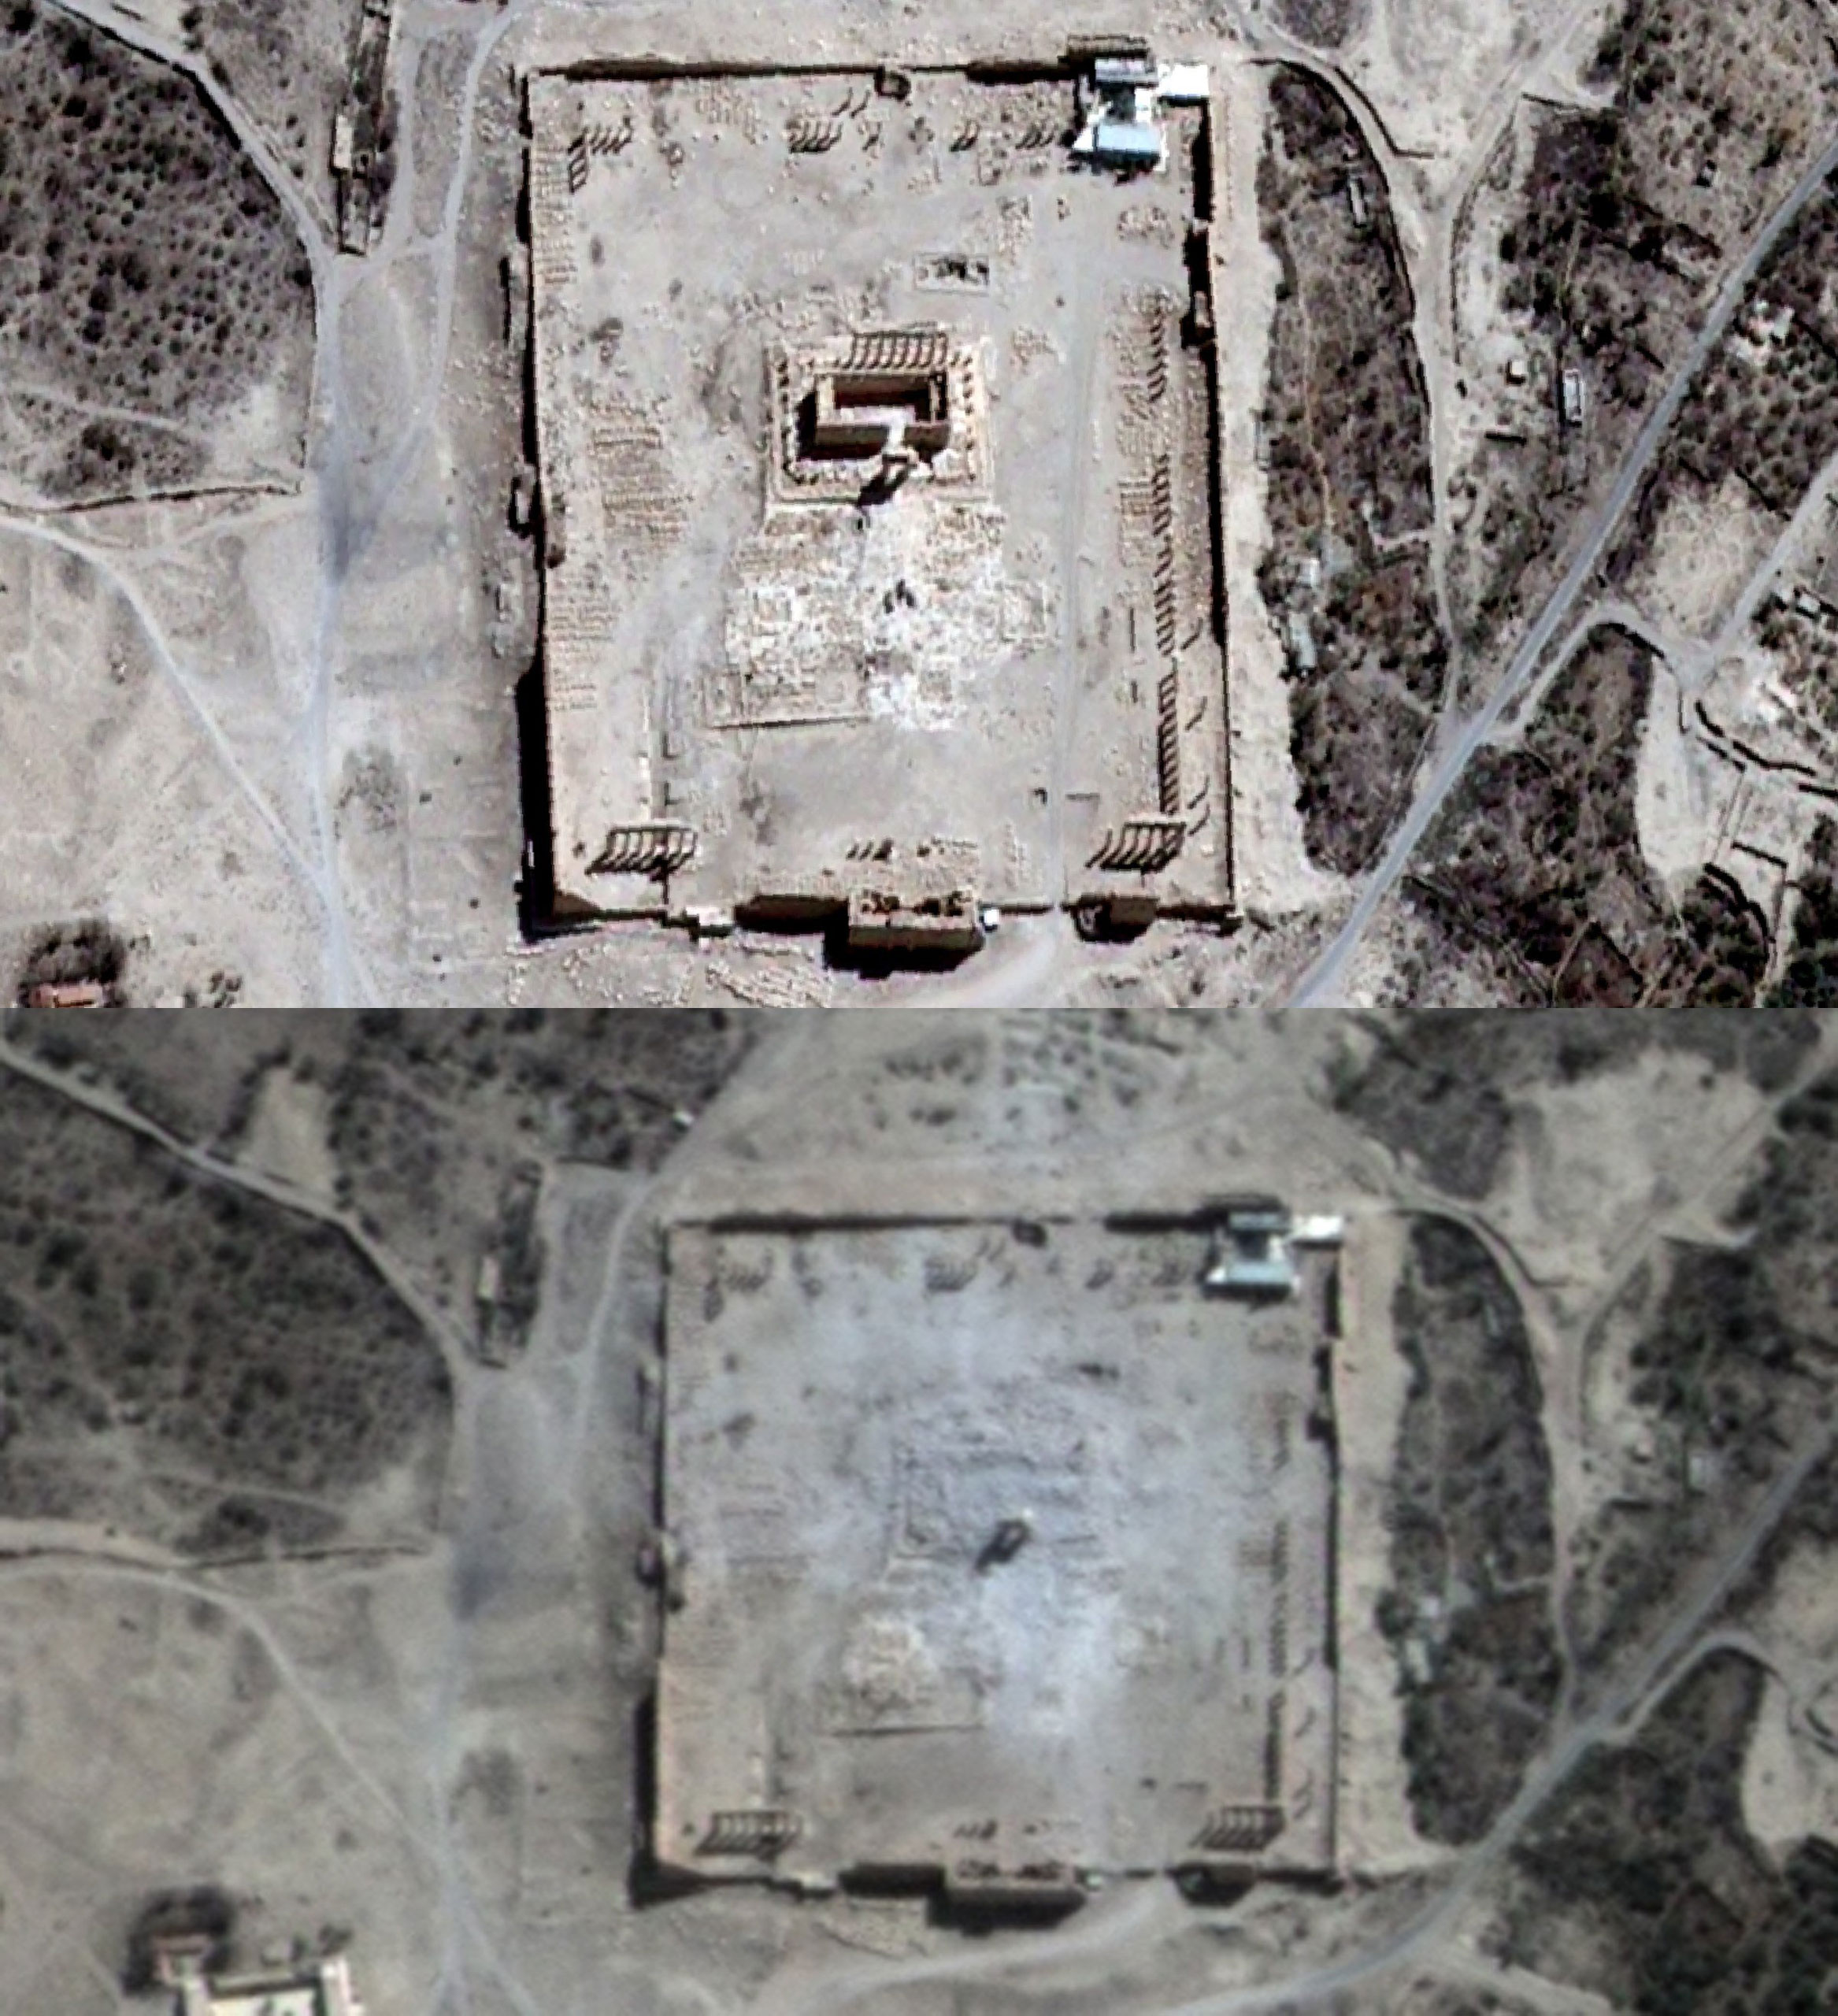 <b>Top:</b> A satellite image of the Temple of Bel seen in Syria's ancient city of Palmyra on Aug. 27, 2015; <b>Bottom:</b> A satellite image showing rubble at the temple's location on Aug. 31, 2015. (UNITAR-UNOSAT/AFP/Getty Images)